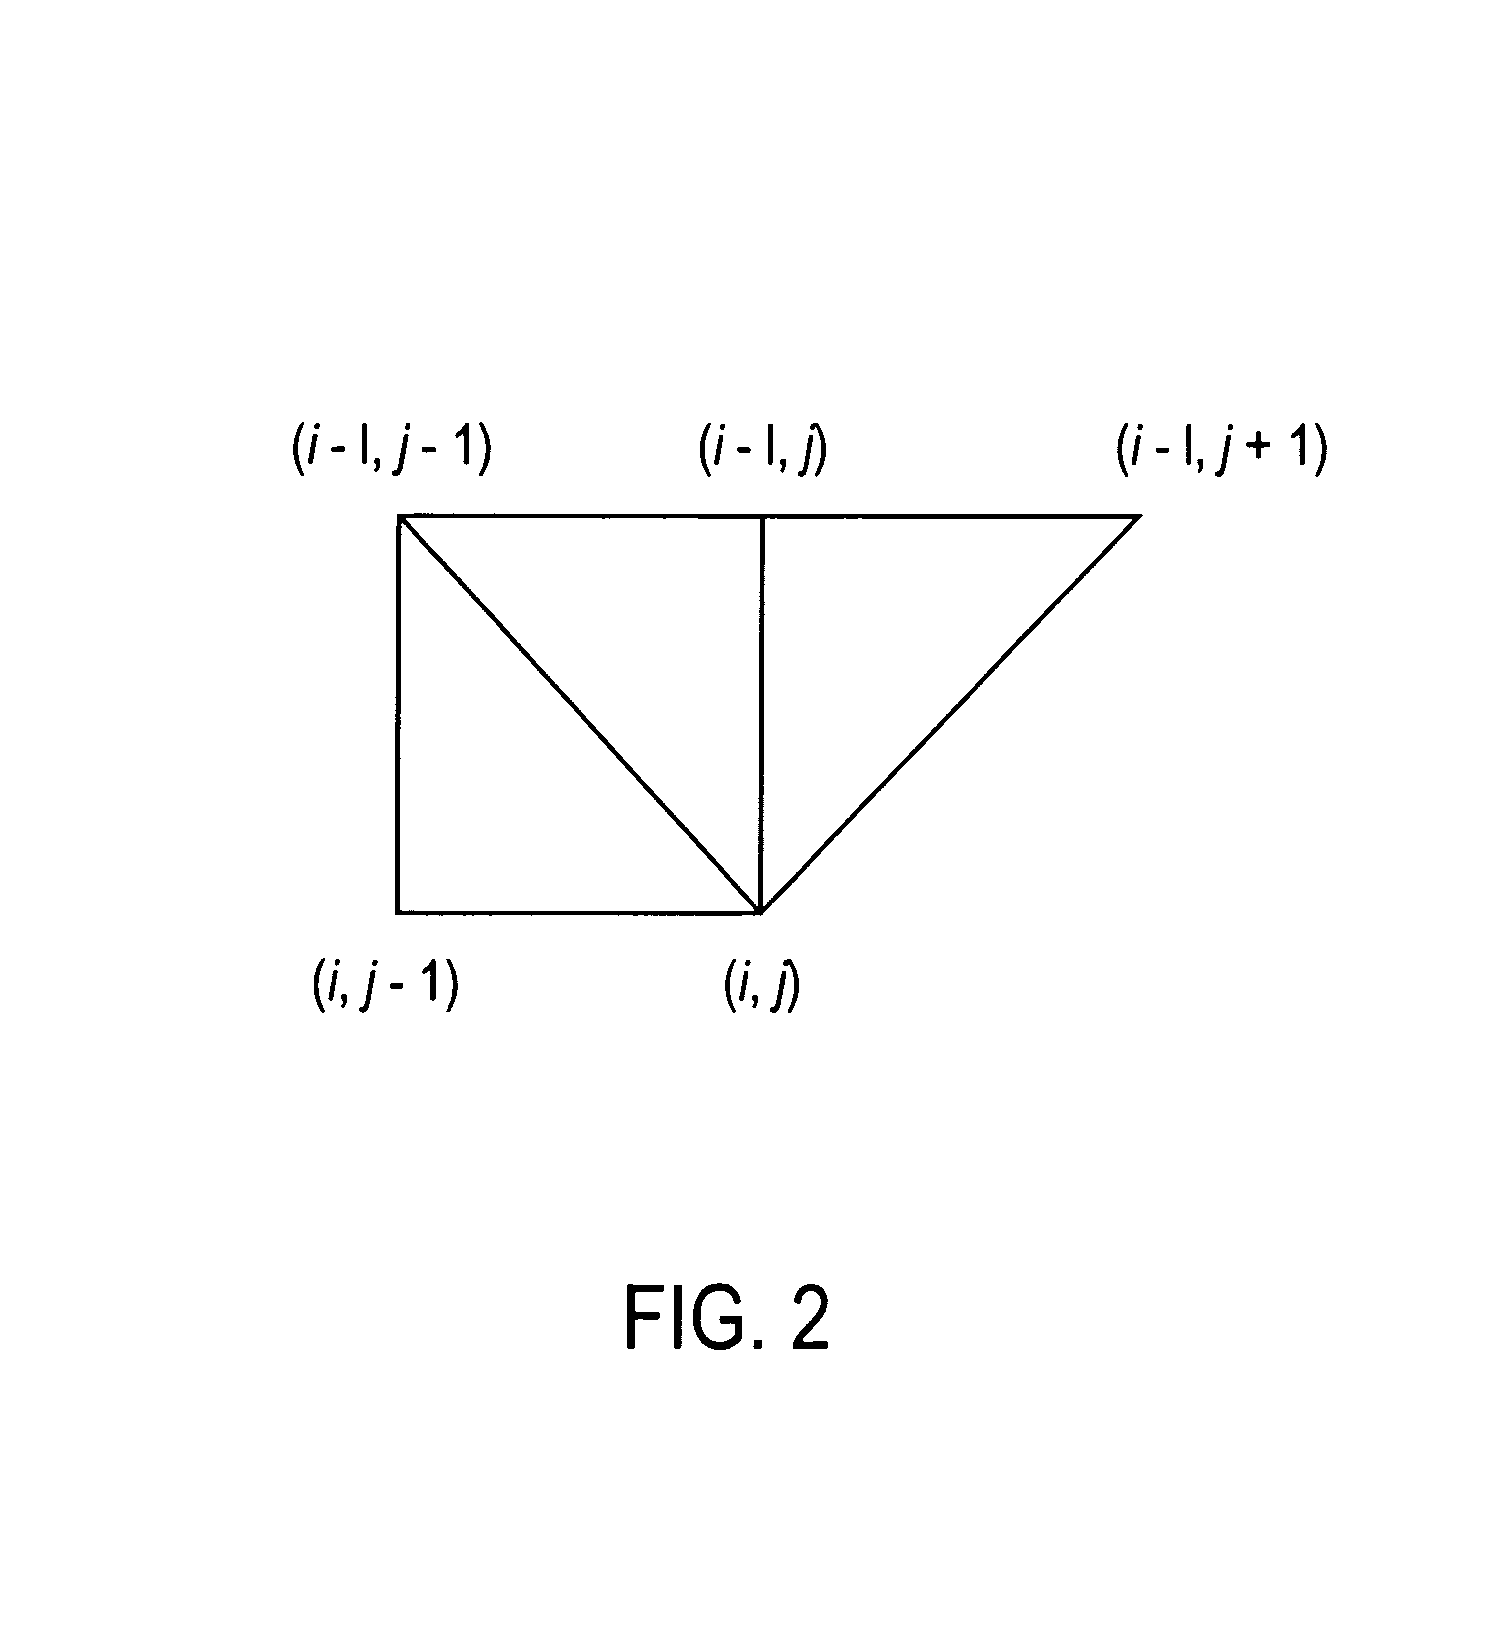 Apparatus and method for determining measure of similarity between images